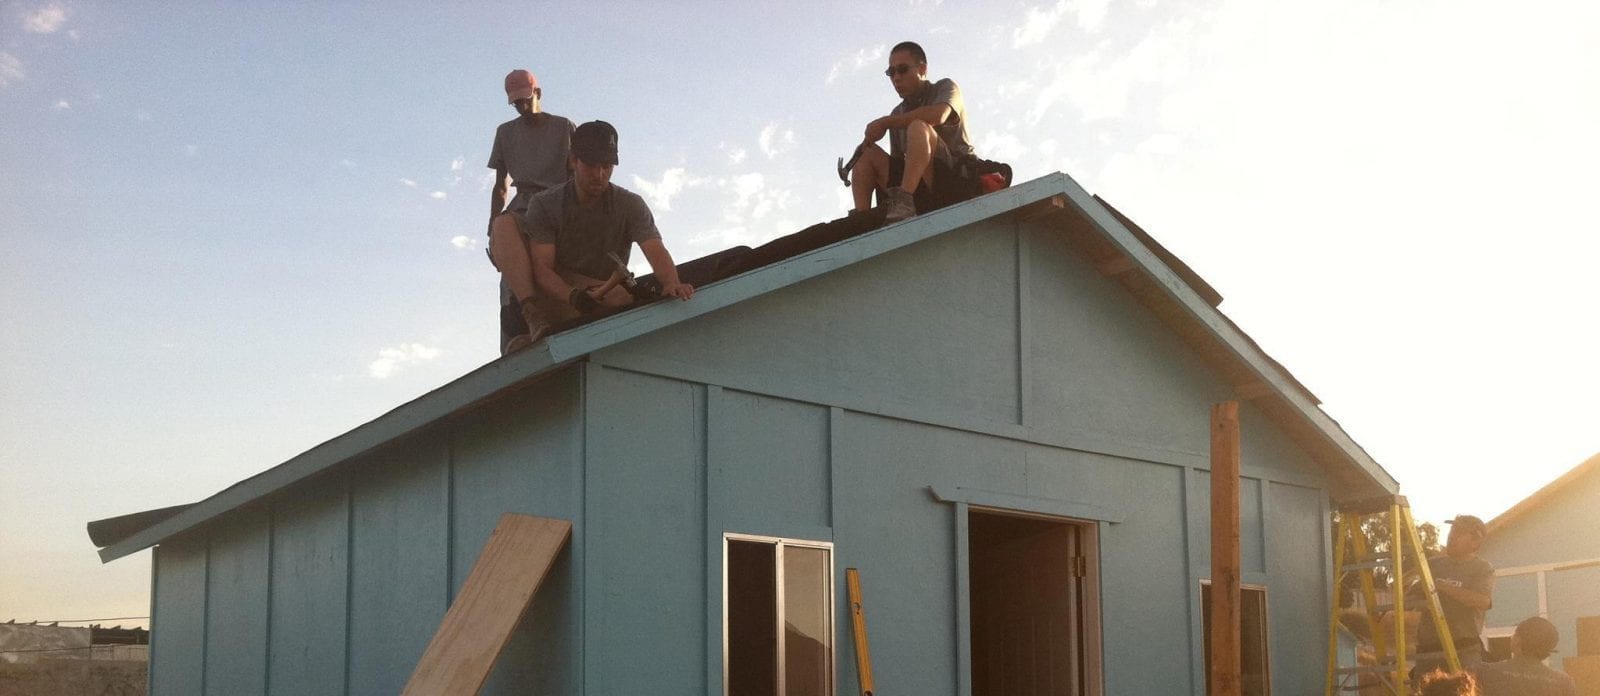 Architecture Students and Alumni Build Supportive Housing in Tijuana, Mexico